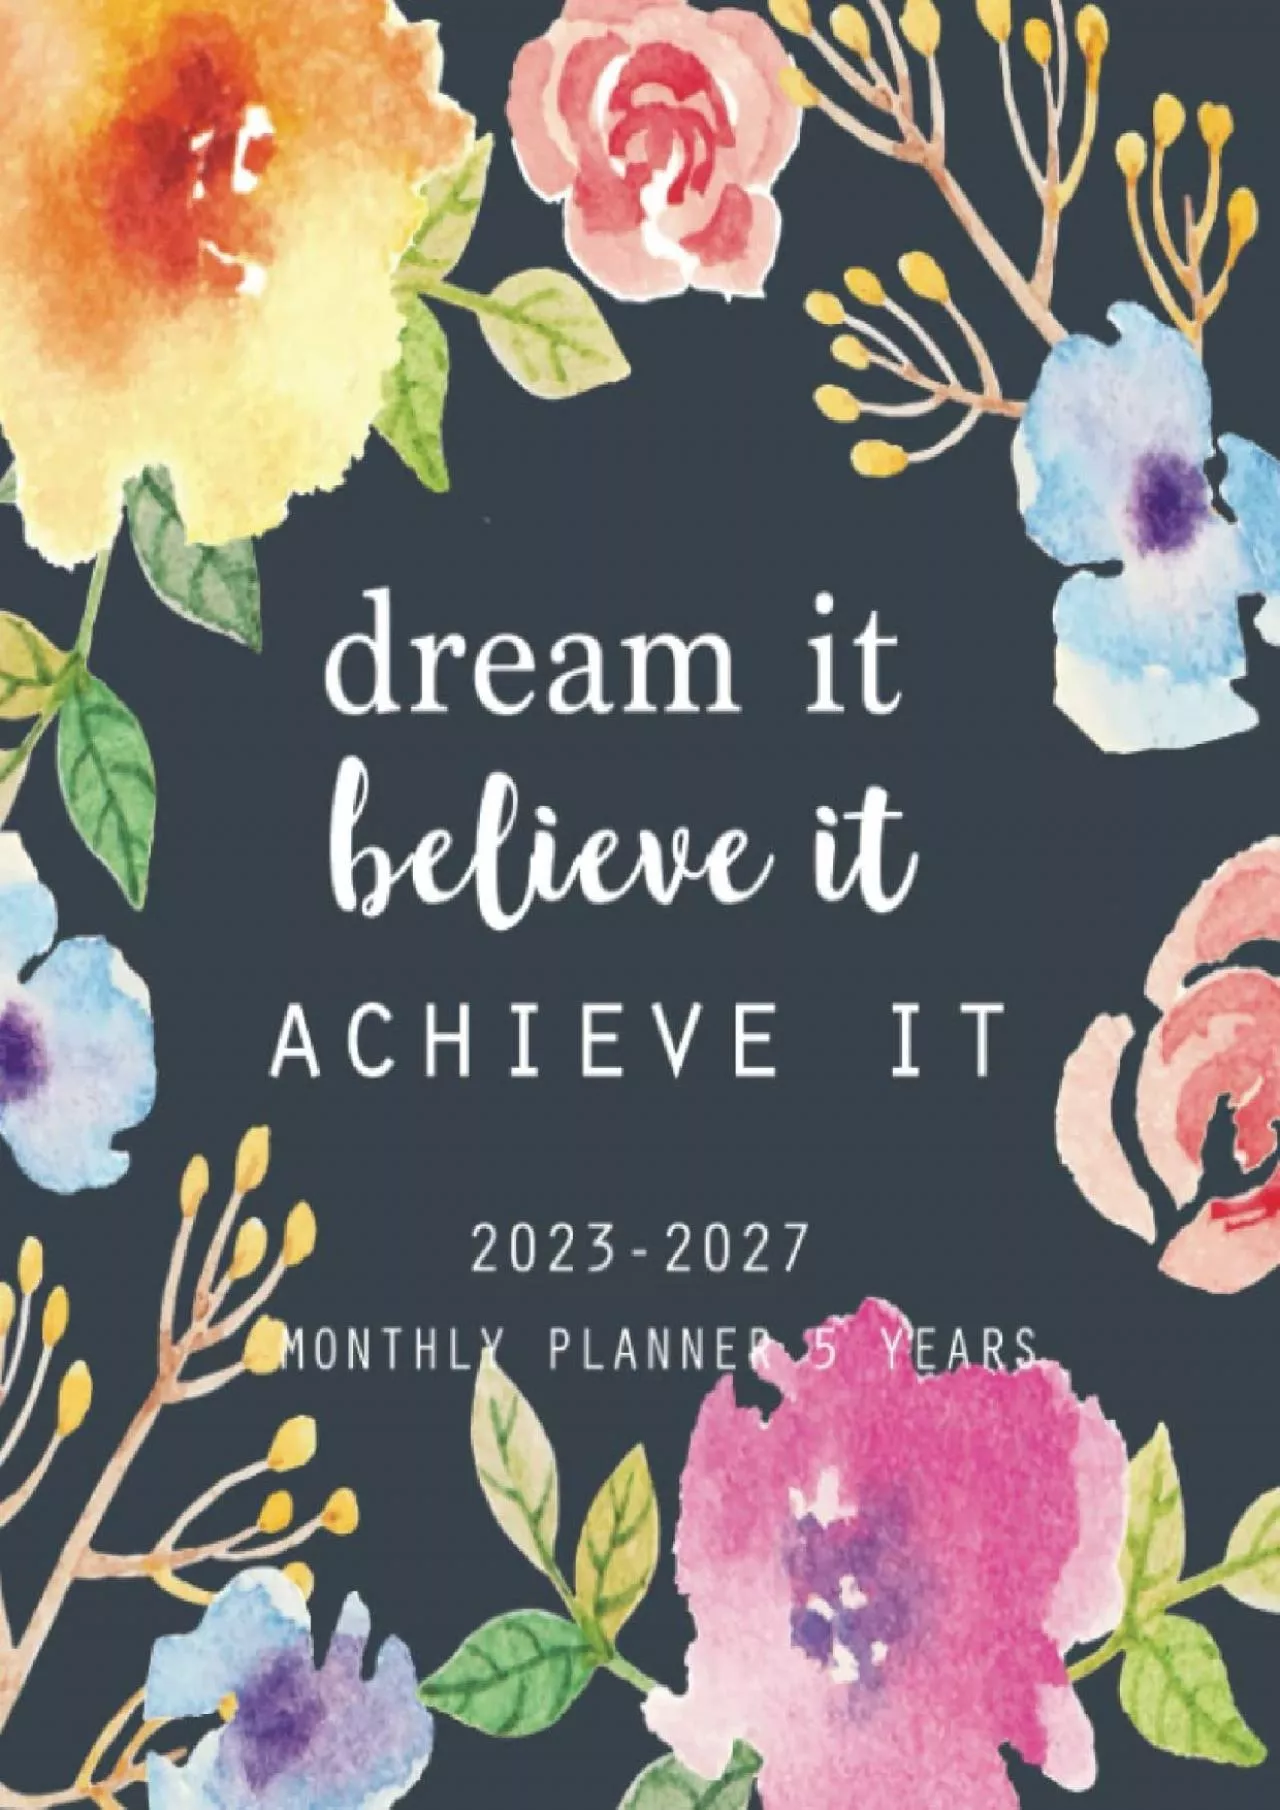 [FREE]-2023-2027 Monthly Planner 5 Years- Dream It, Believe It, Achieve It: (Years 2023,2024,2025,2026,2027